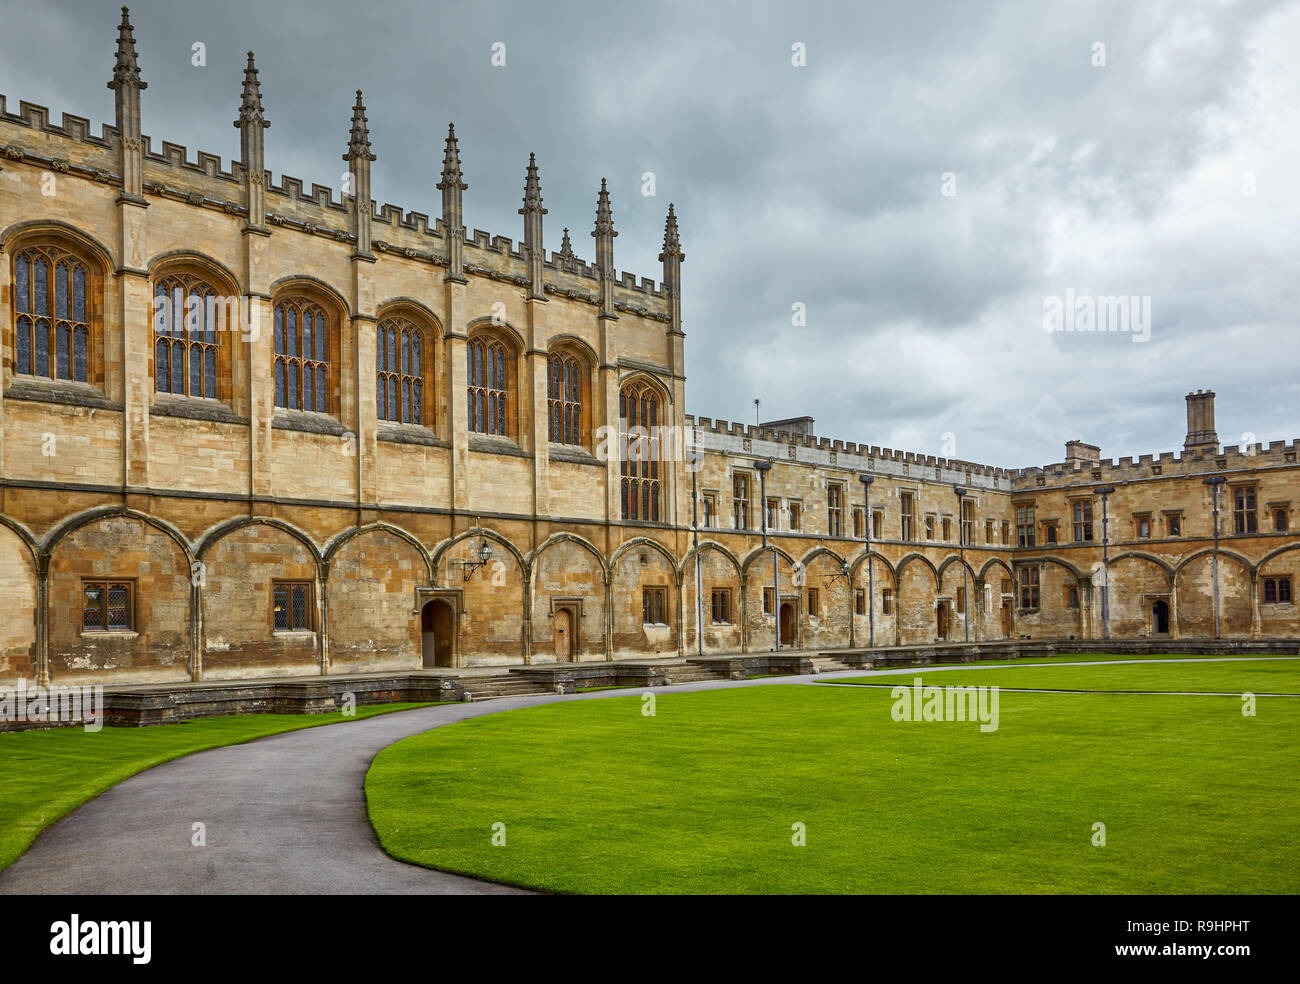 The view of the Great Dining Hall  in the Tom Quad of Christ Church. Oxford University. England Stock Photo